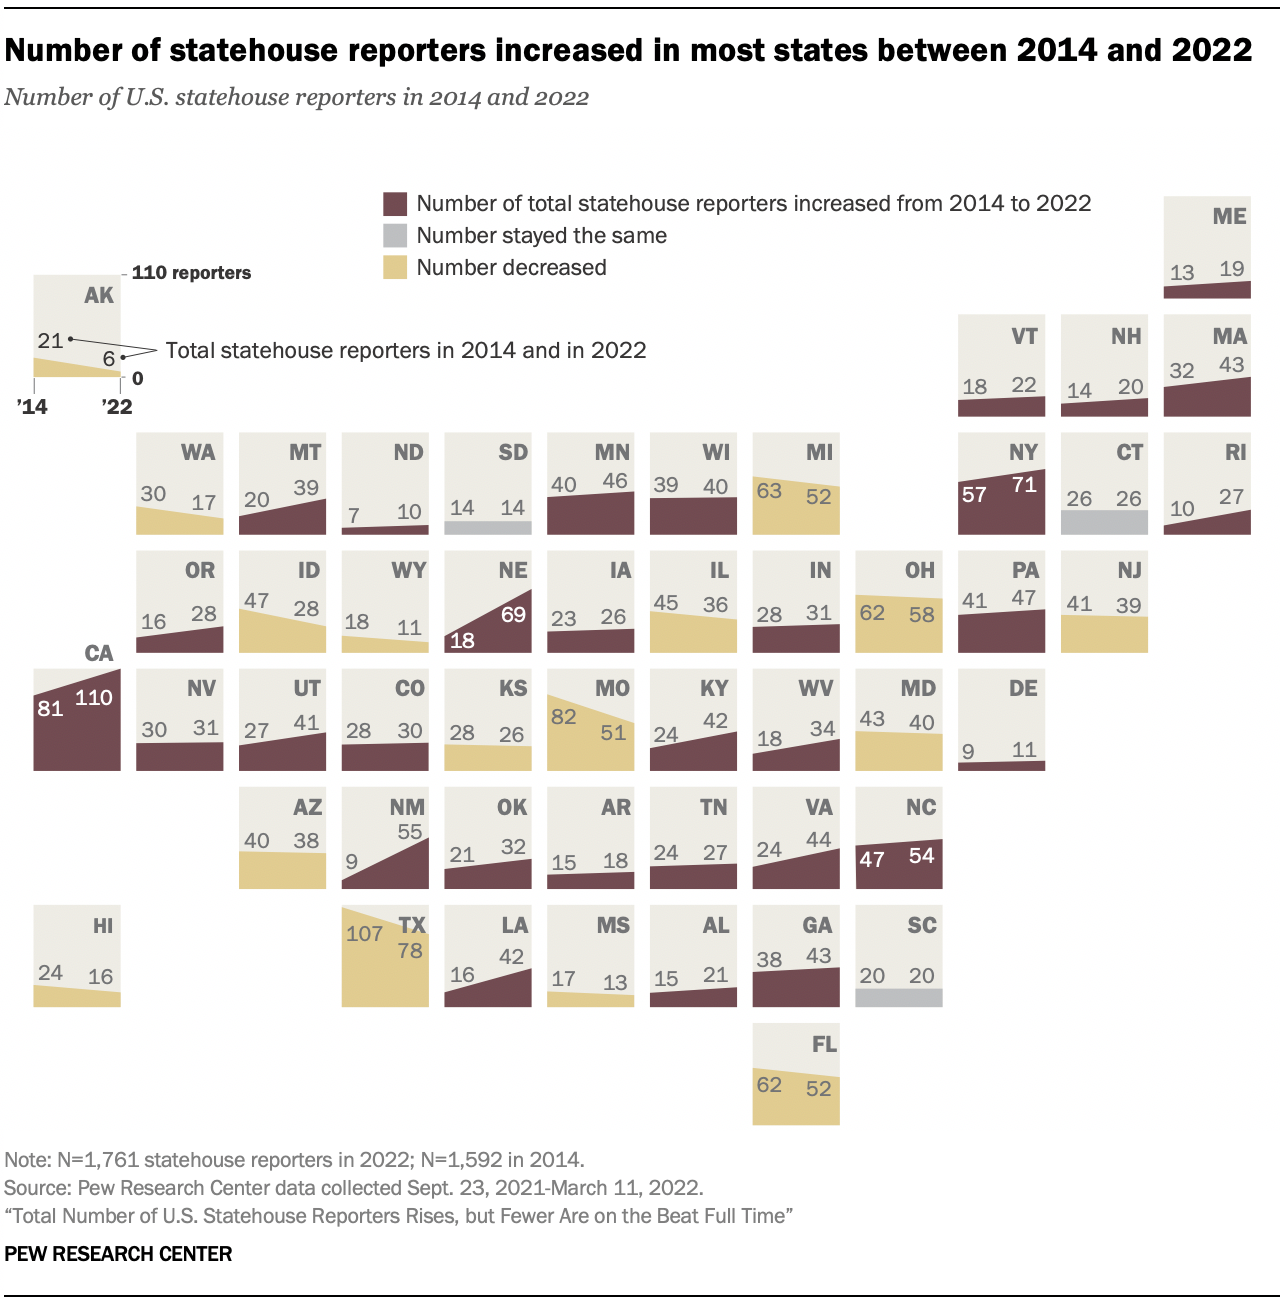 Number of statehouse reporters increased in most states between 2014 and 2022